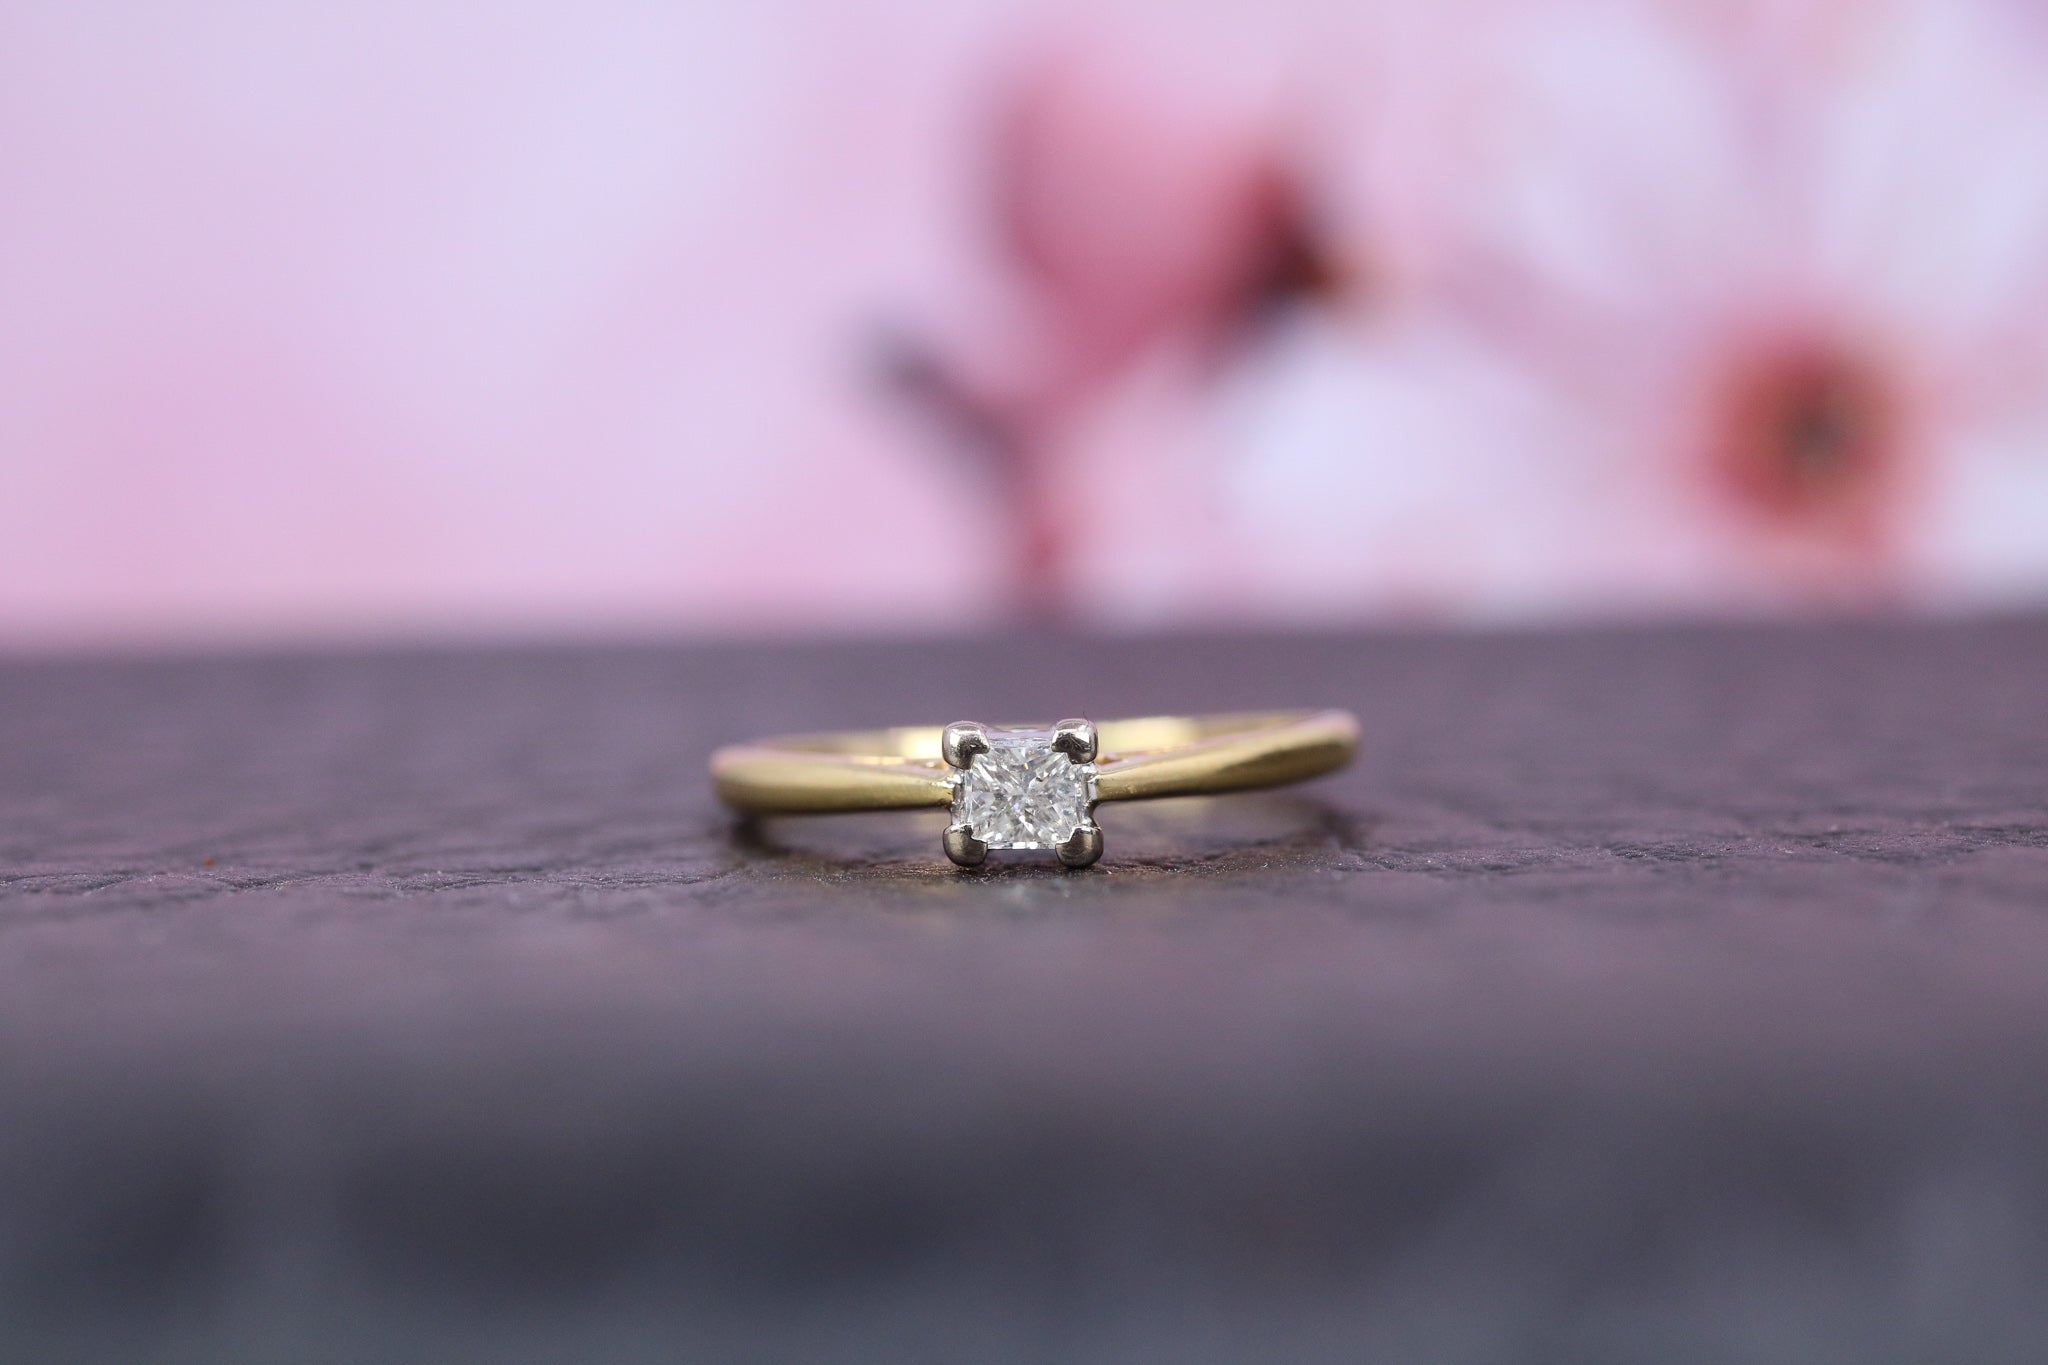 18ct Yellow Gold & Diamond Ring - W6028 - Hallmark Jewellers Formby & The Jewellers Bench Widnes